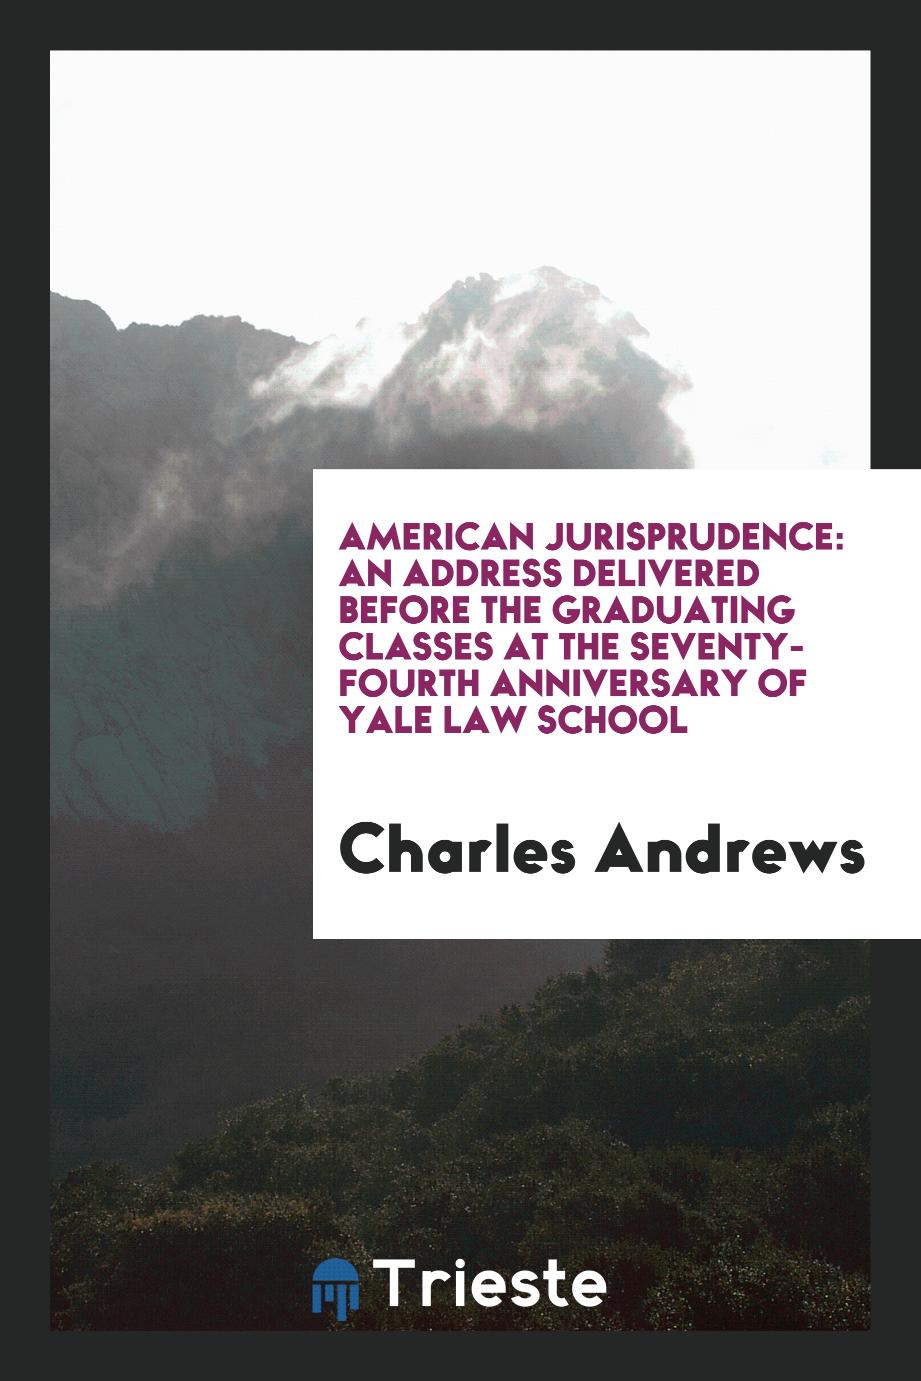 American Jurisprudence: An Address Delivered Before the Graduating Classes at the Seventy-fourth Anniversary of Yale Law School